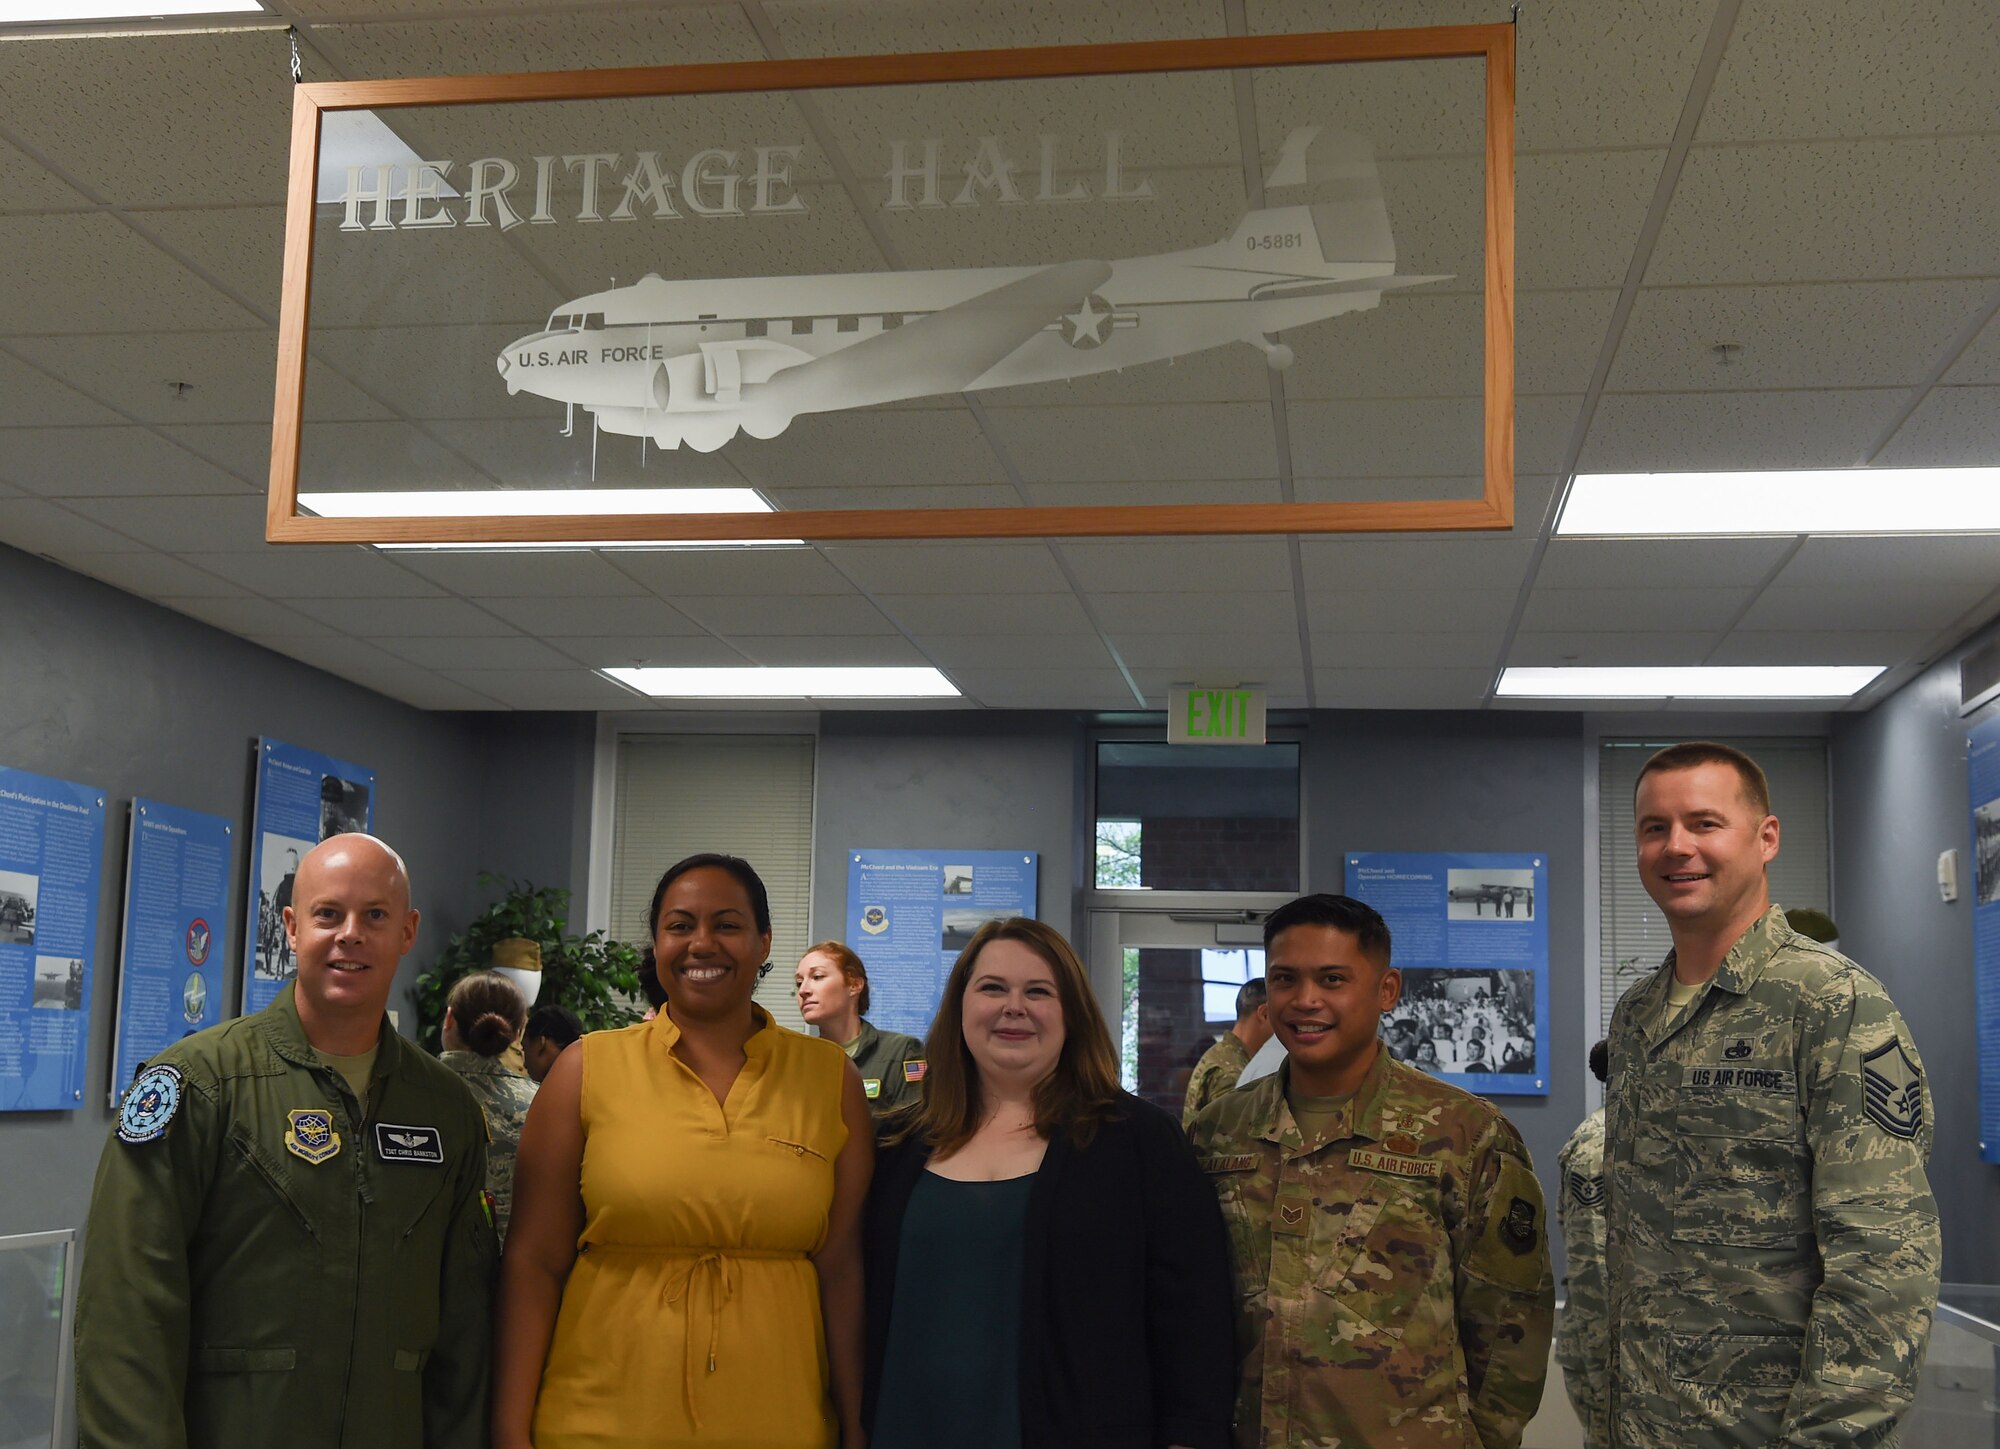 Erin Lasley, middle, 62nd Airlift Wing historian, and her team pose for a photo after a ribbon cutting ceremony opening the new Heritage Hall in the wing headquarters building at Joint Base Lewis-McChord, Wash., Oct. 21, 2019. Lasley and her team updated the hall to showcase Team McChord’s heritage. (U.S. Air Force photo by Senior Airman Tryphena Mayhugh)